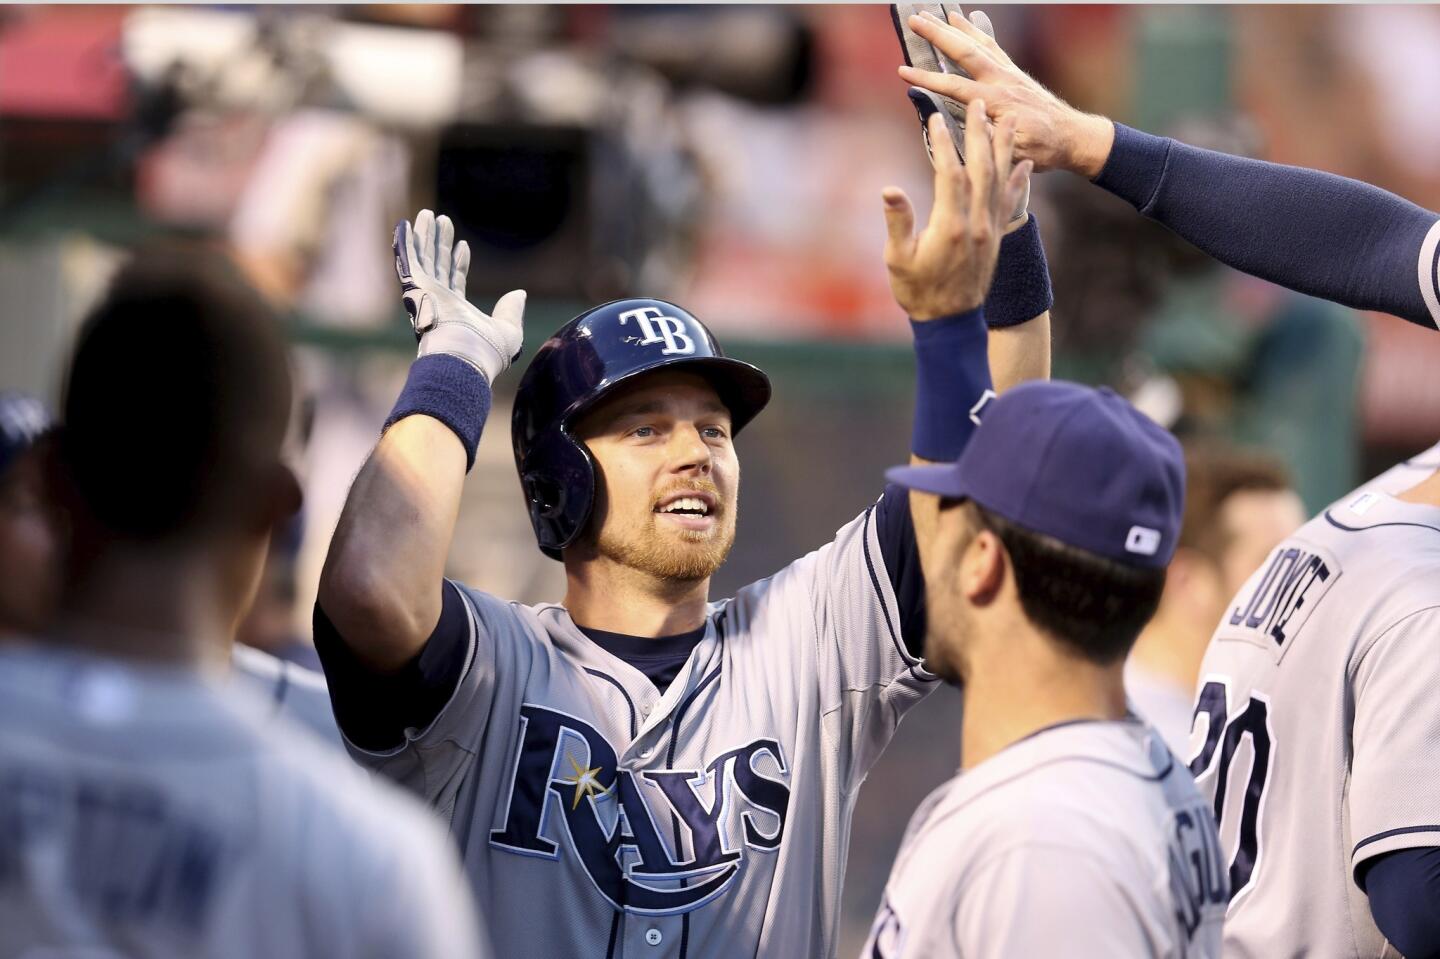 Underrated: Ben Zobrist, 2B, Tampa Bay Rays